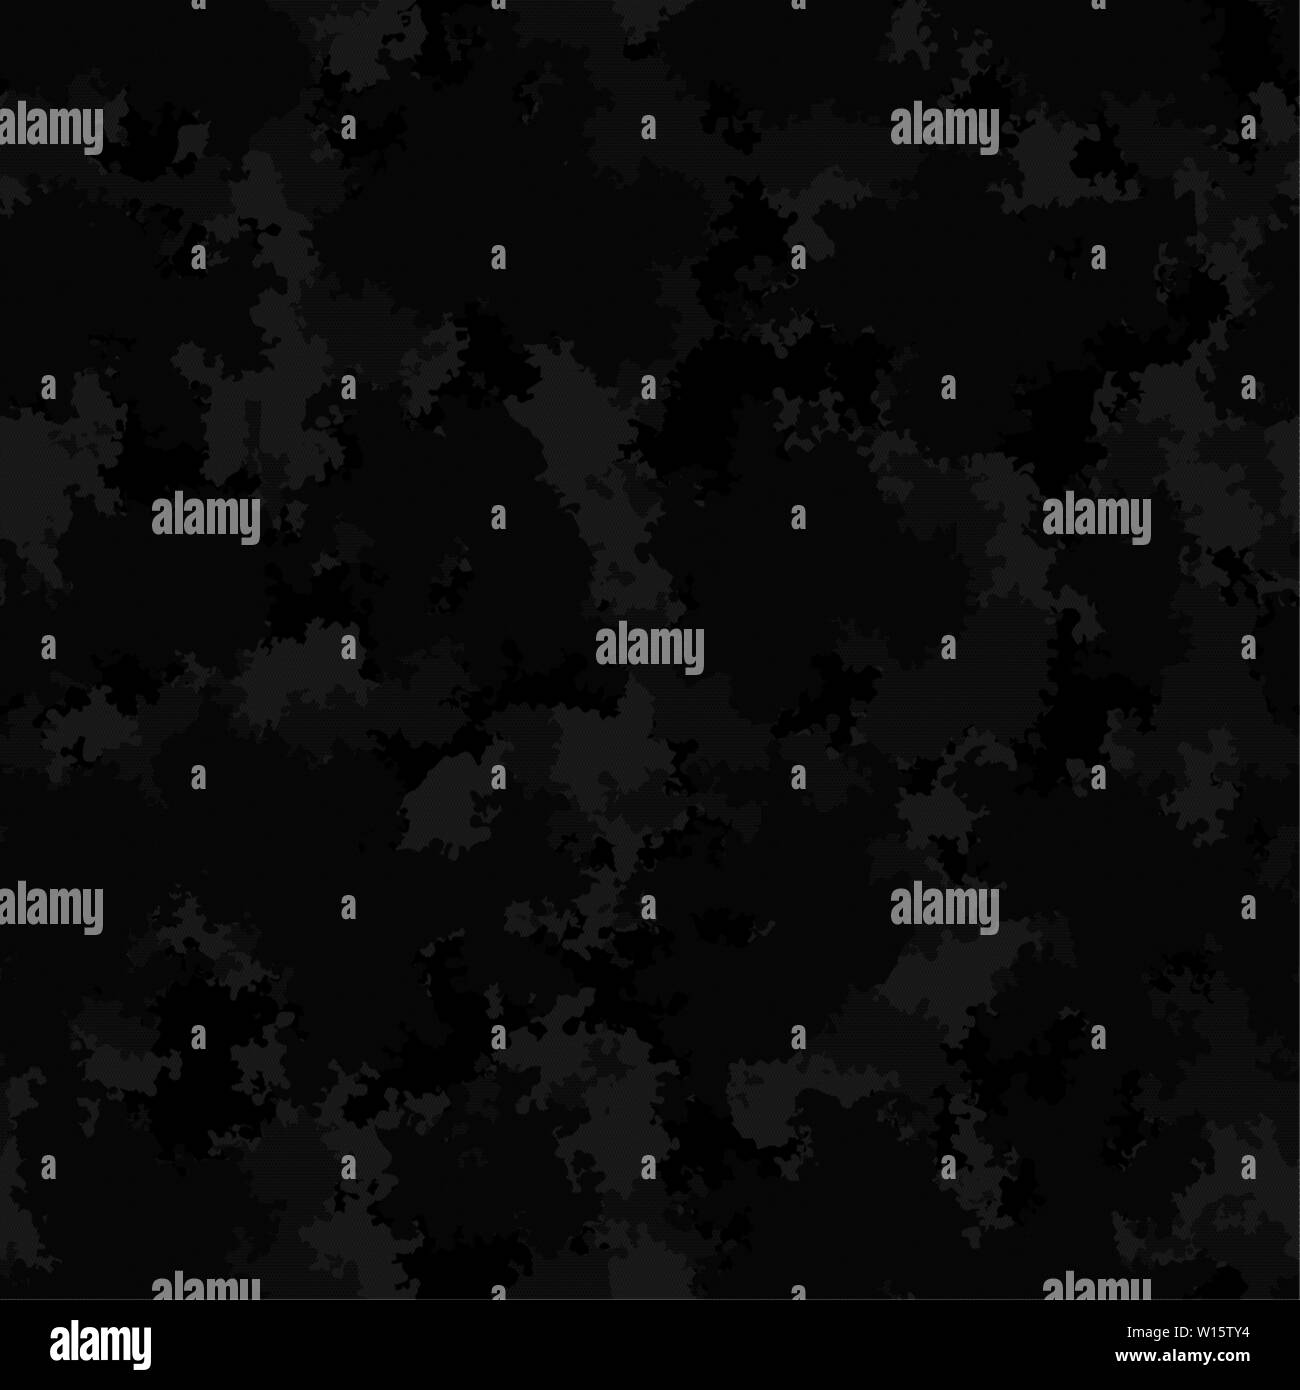 Camouflage Black and White Stock Photos & Images - Alamy